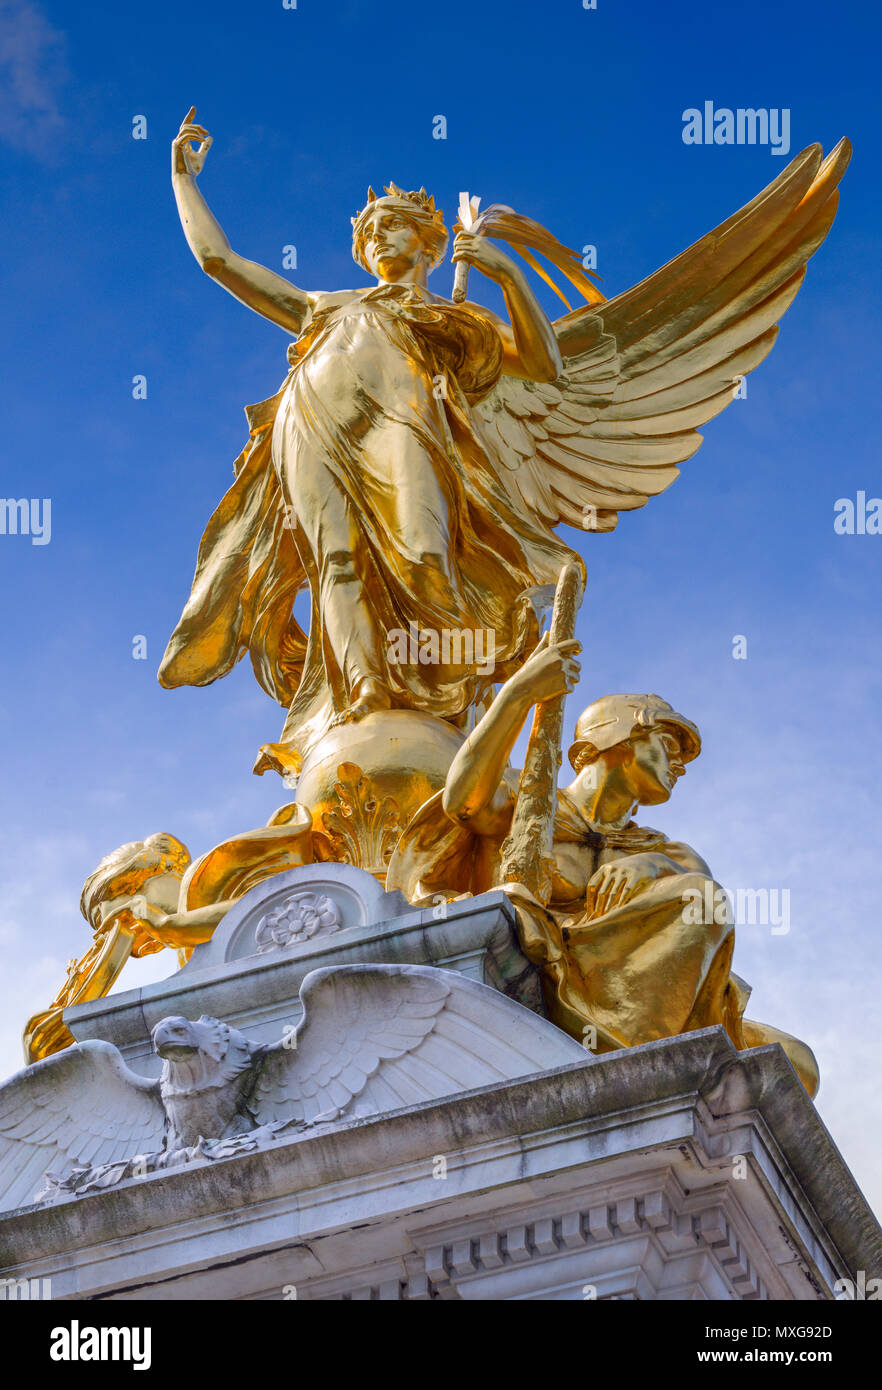 Looking up to the gilded bronze section of the Queen Victoria Memorial showing the Winged Victory Statue above with Constancy to the left and Courage  Stock Photo